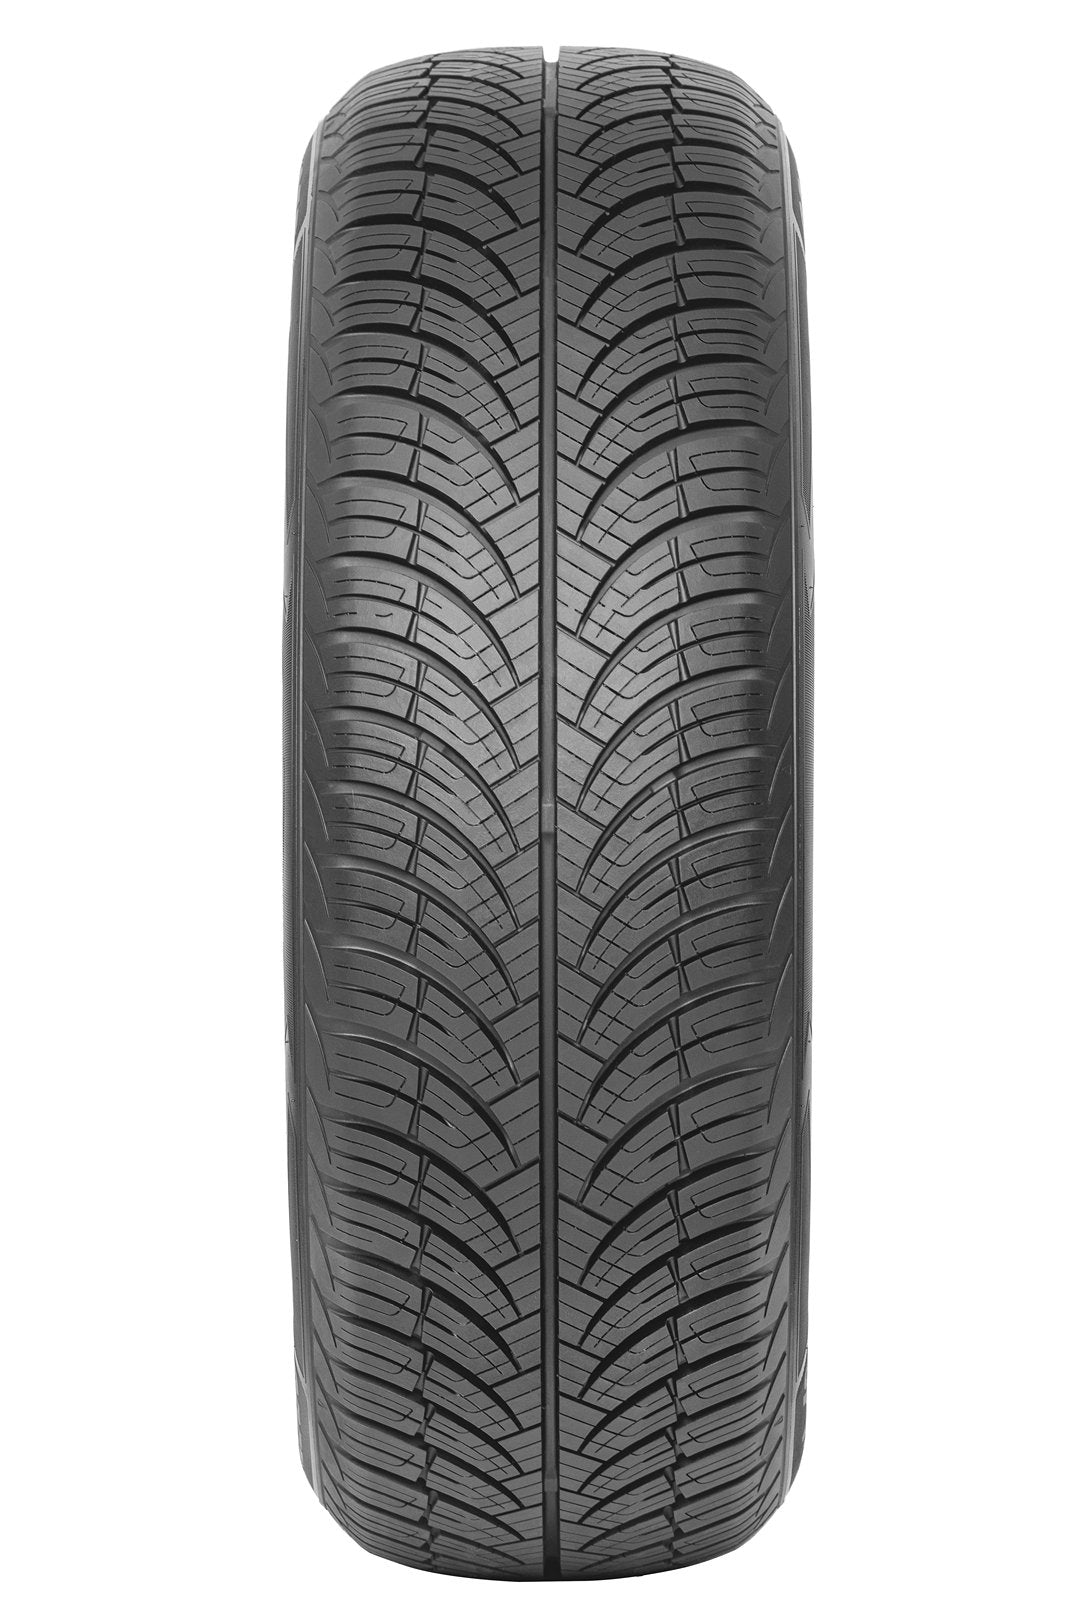 215/70R16 GRENLANDER GREENWING A/S ALL WEATHER - Toee Tire